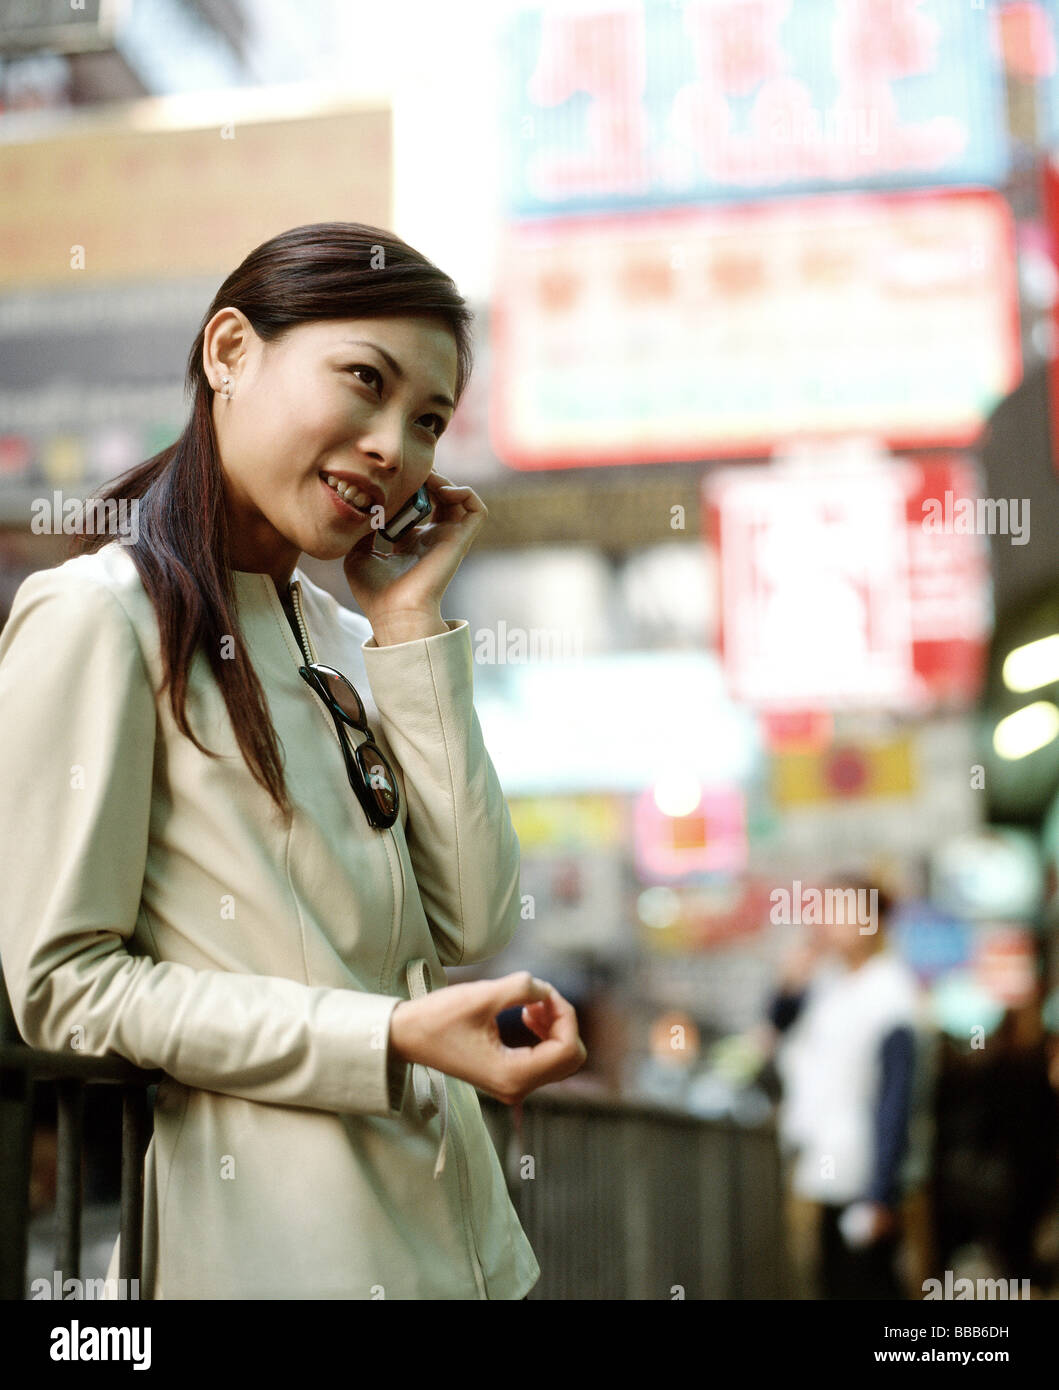 Woman using cellular phone in busy street. Stock Photo